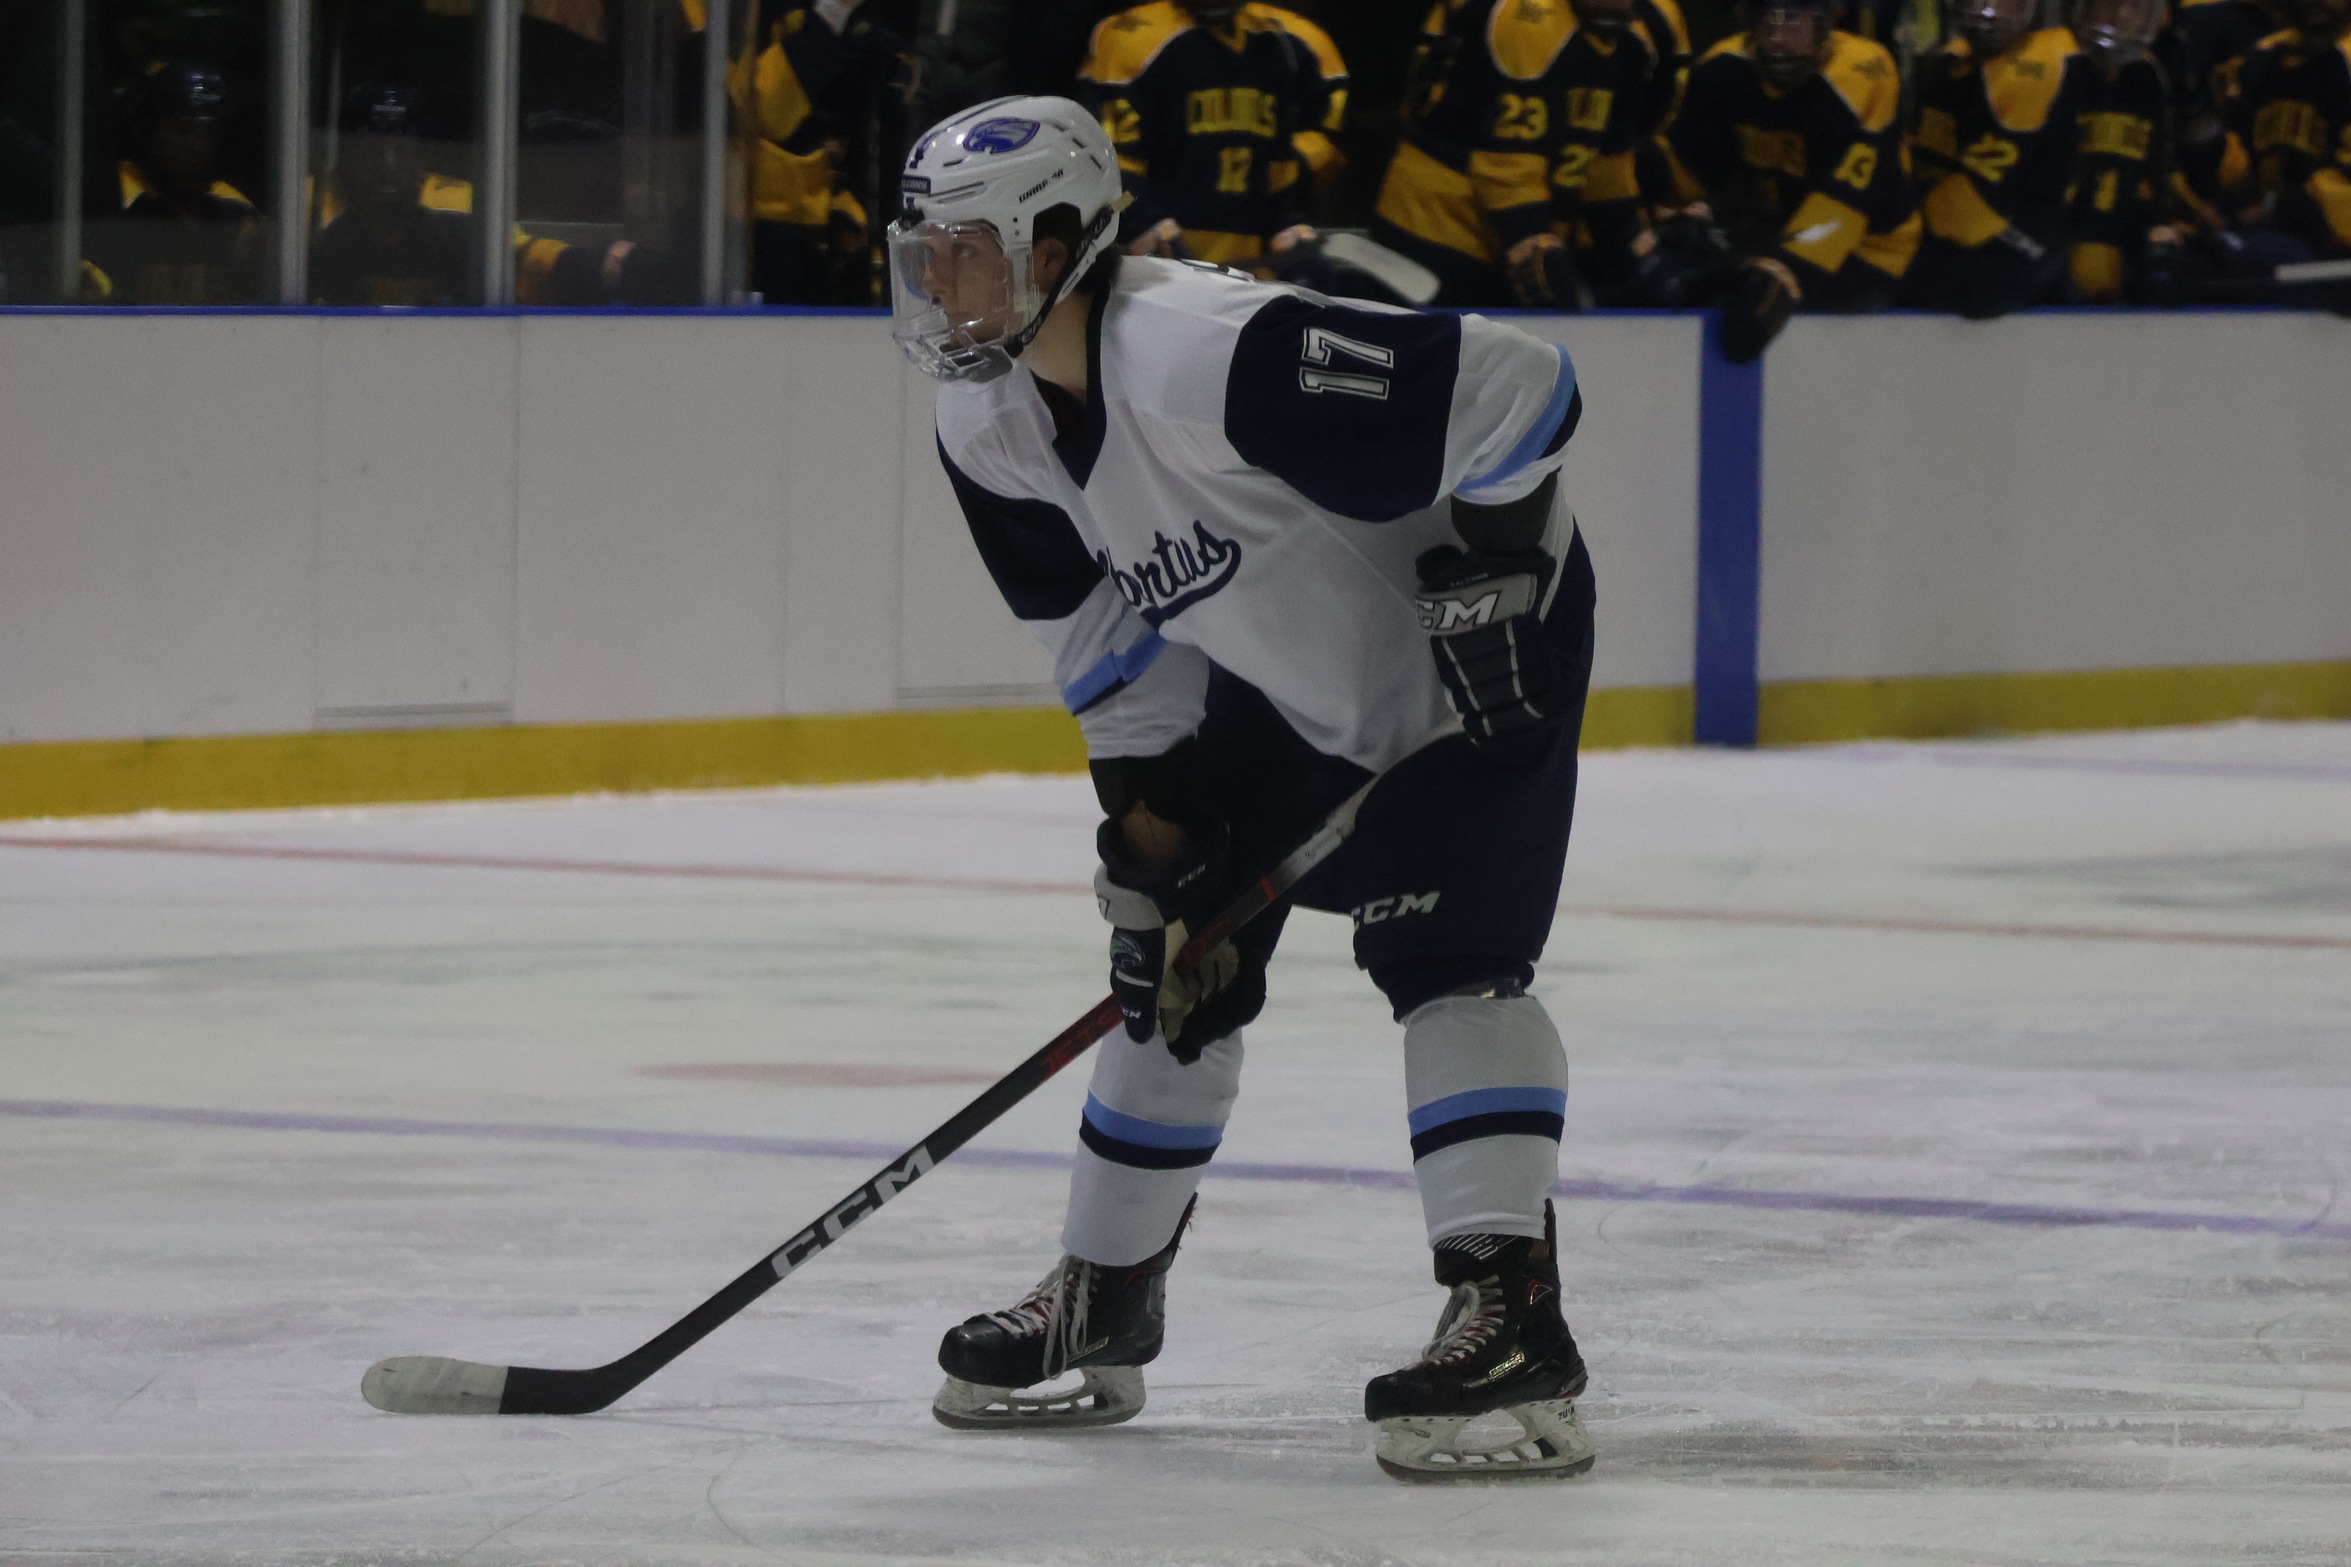 Last-Minute Goal From Hicks Sends Men's Hockey To Second Straight Win